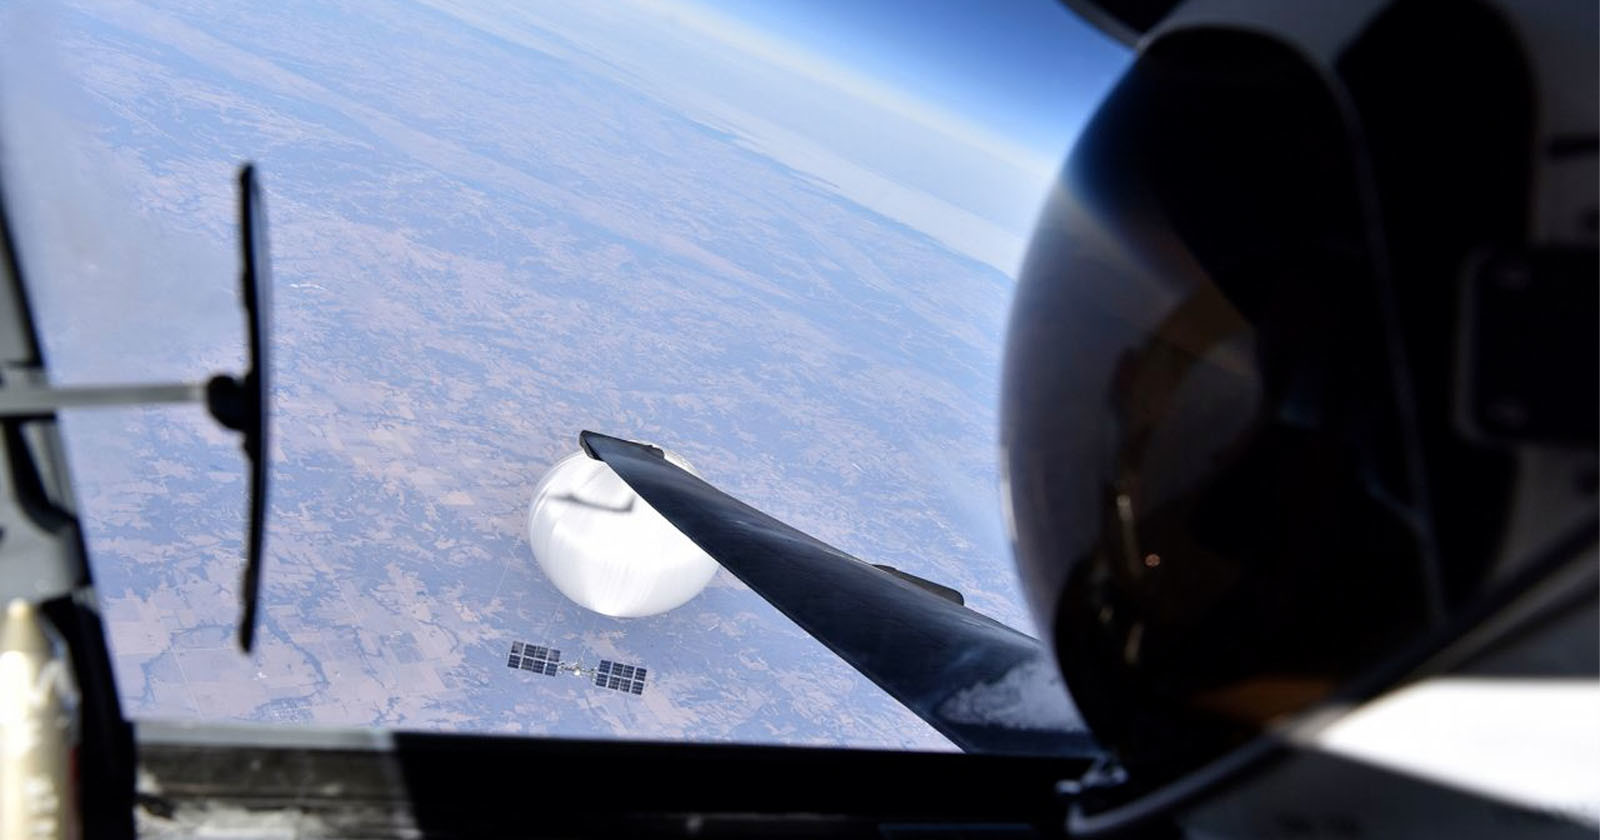 Pentagon Refuses to Release Footage of UFOs Being Shot Down